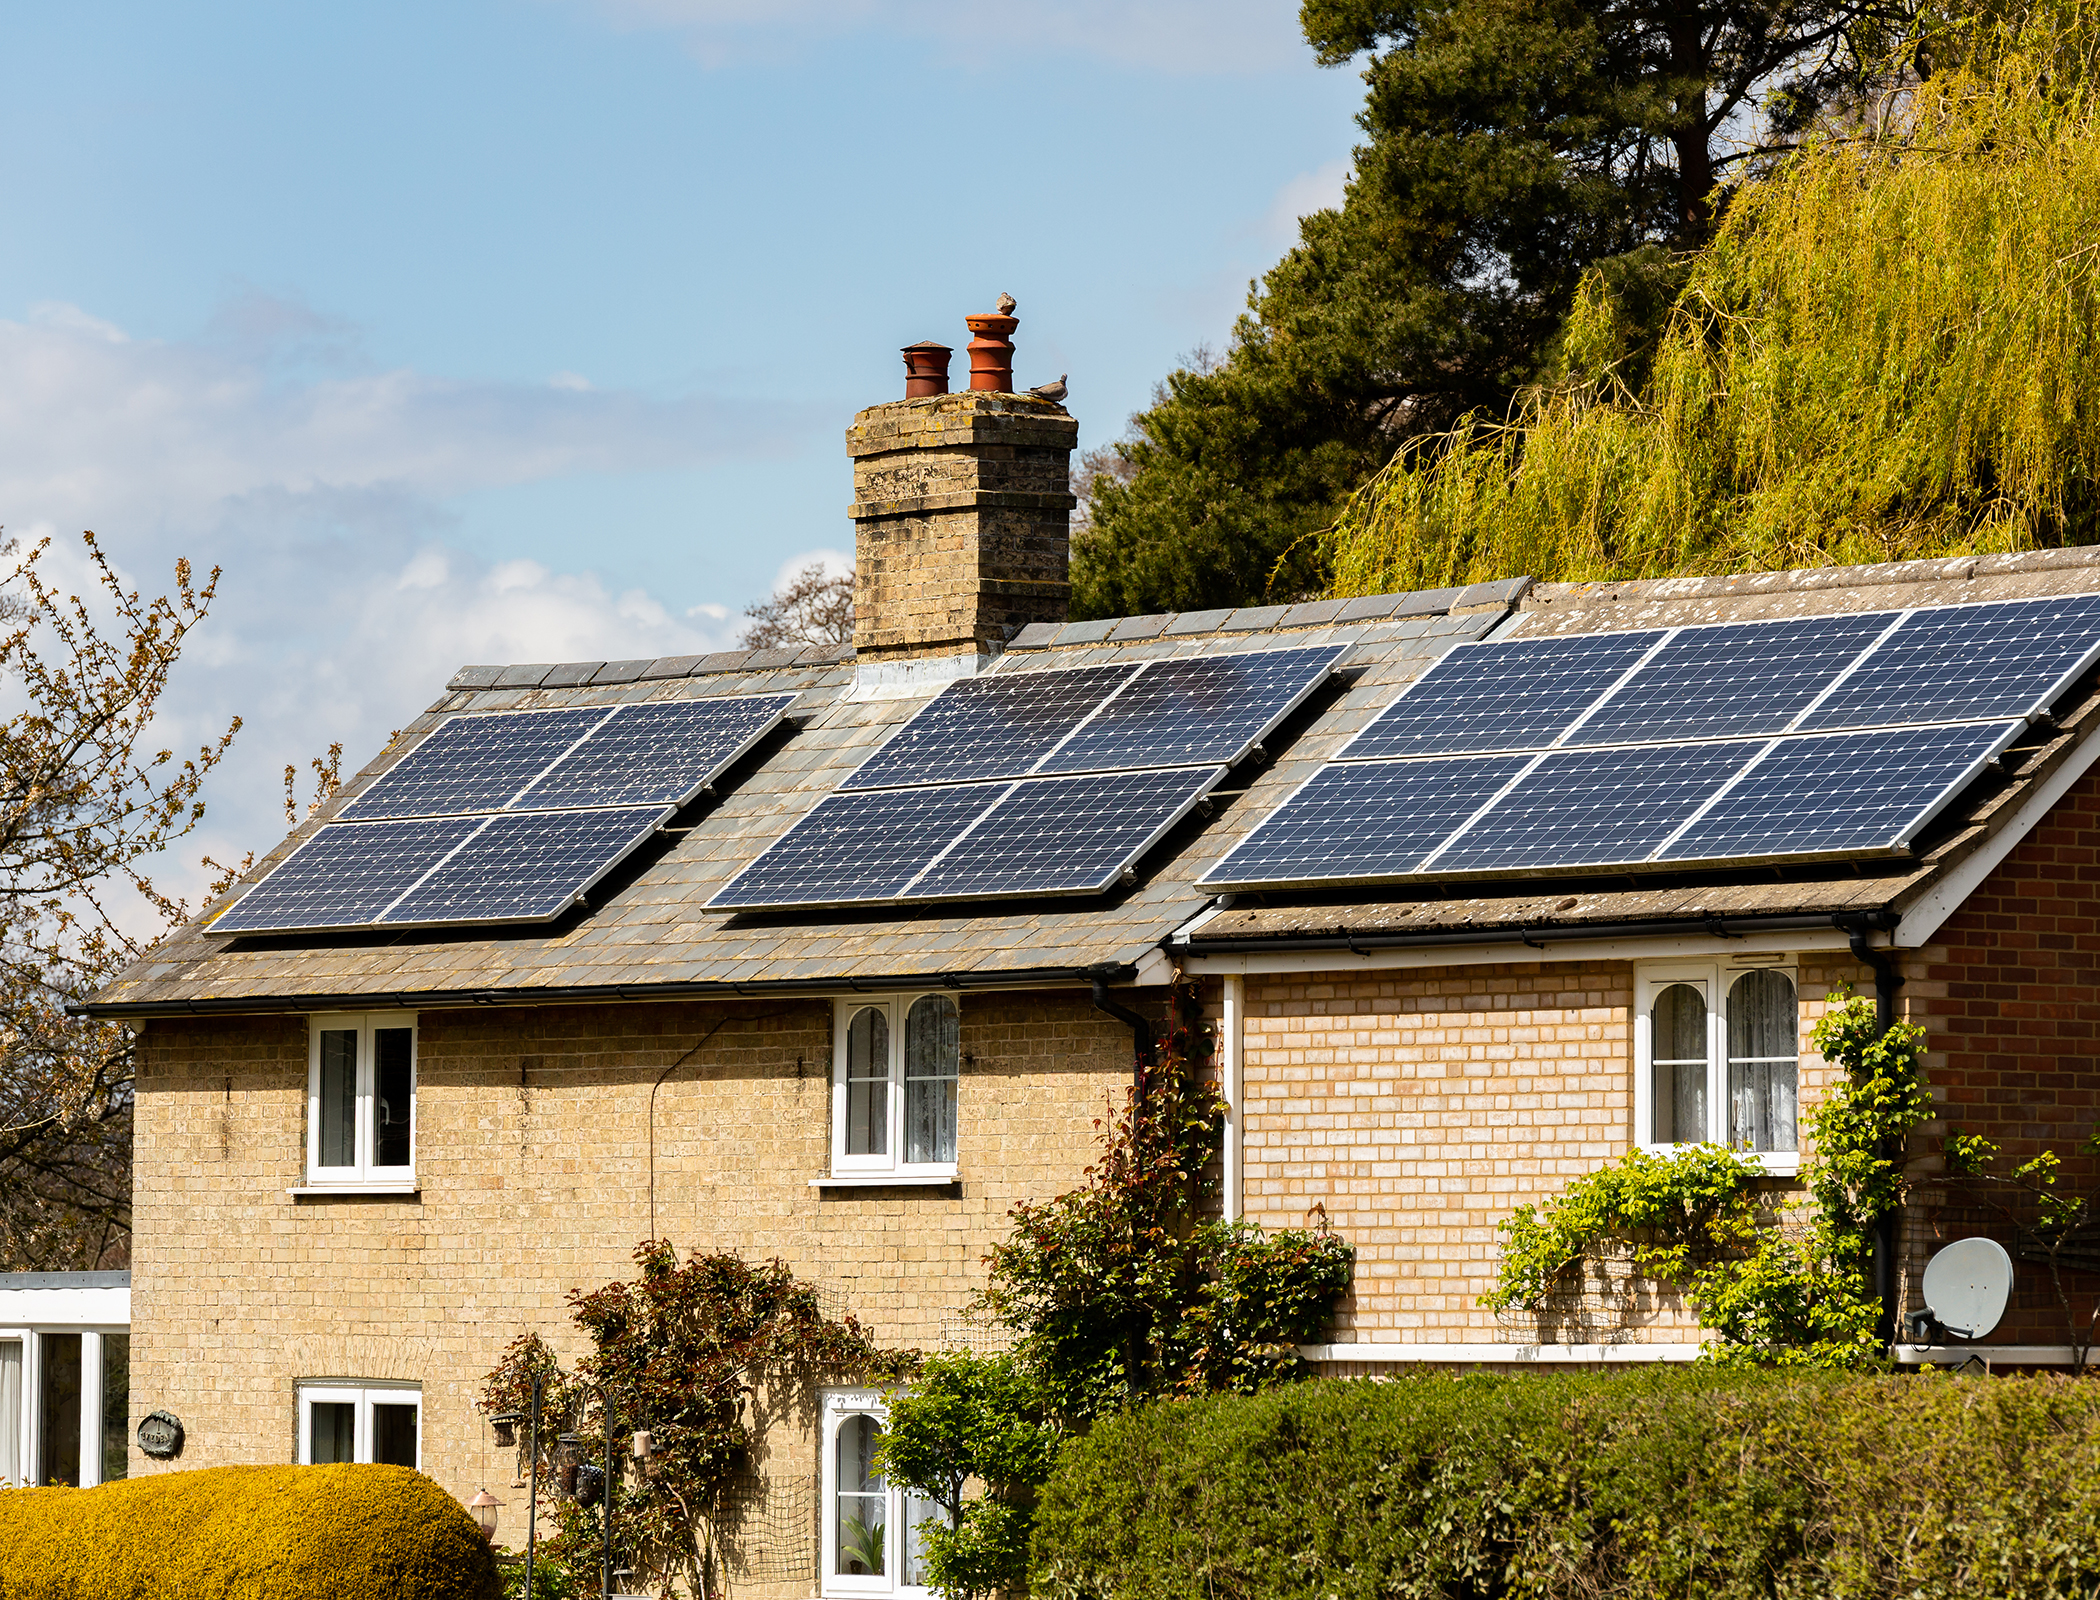 Record number of solar panels and heat pumps installed in UK homes